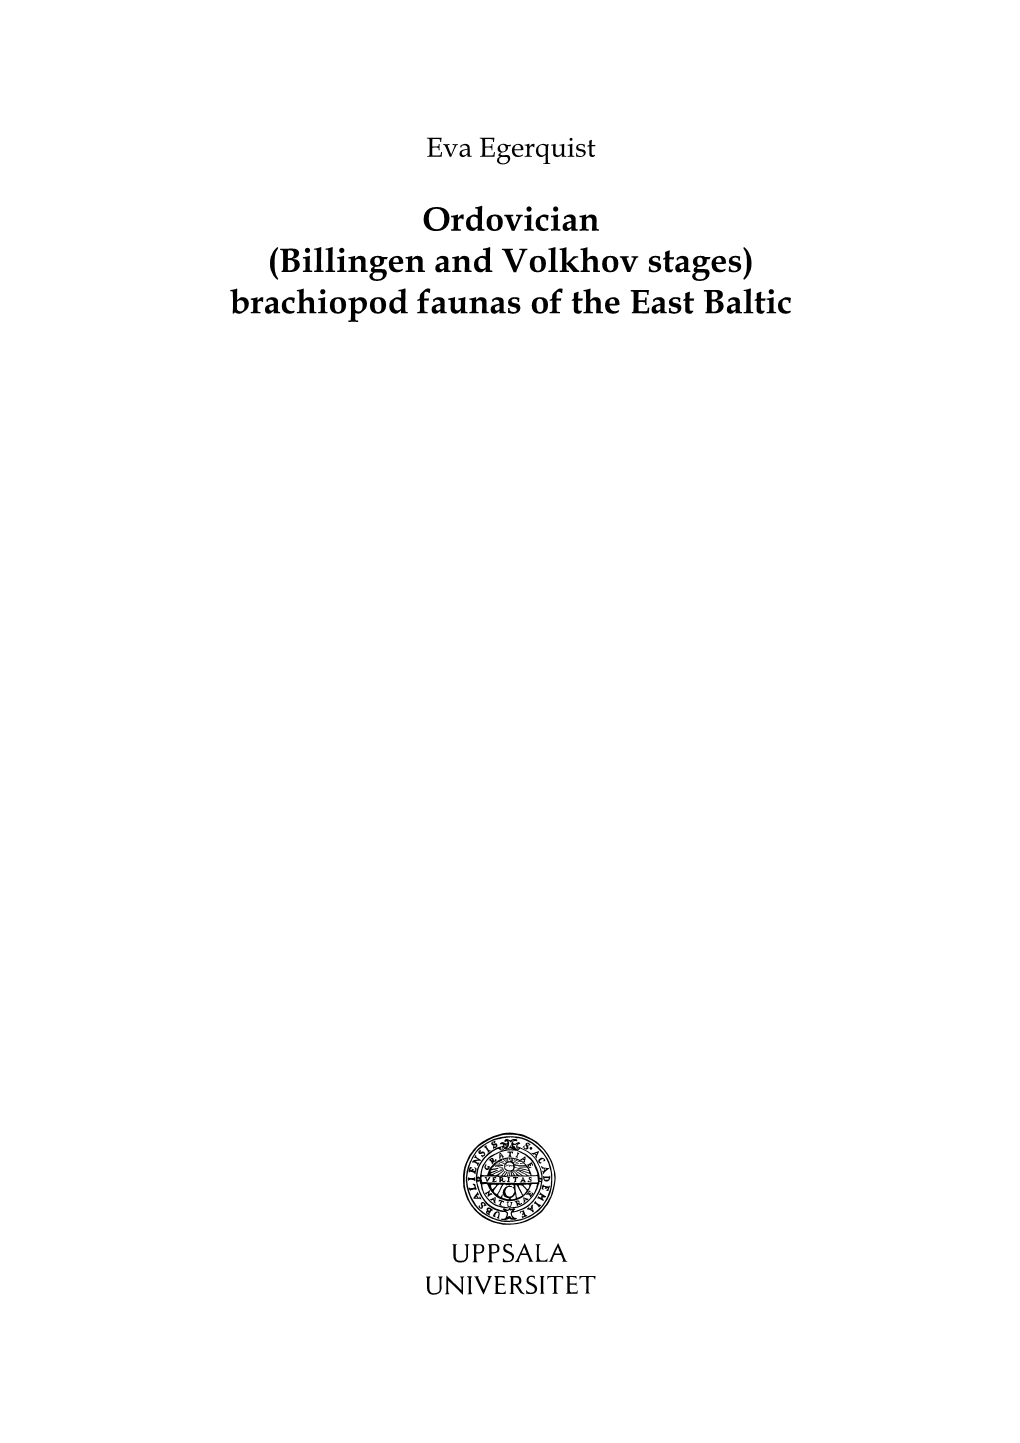 Ordovician (Billingen and Volkhov Stages) Brachiopod Faunas of the East Baltic